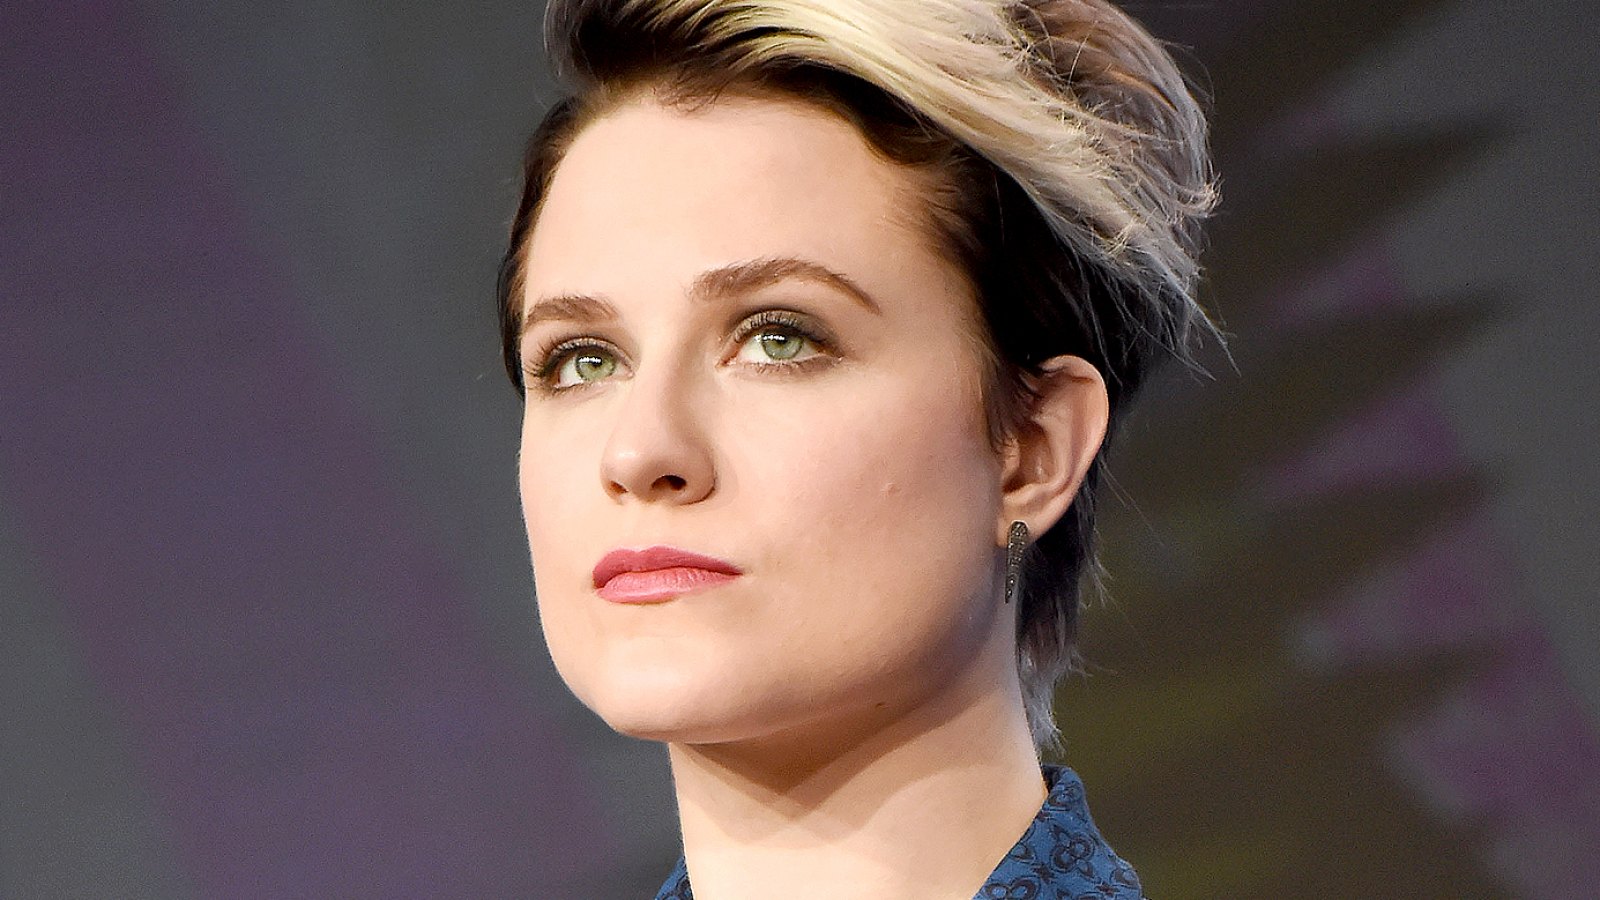 Evan Rachel Wood speaks onstage during the 'Westworld' panel discussion at the HBO portion of the 2016 Television Critics Association Summer Tour at The Beverly Hilton Hotel on July 30, 2016 in Beverly Hills, California.